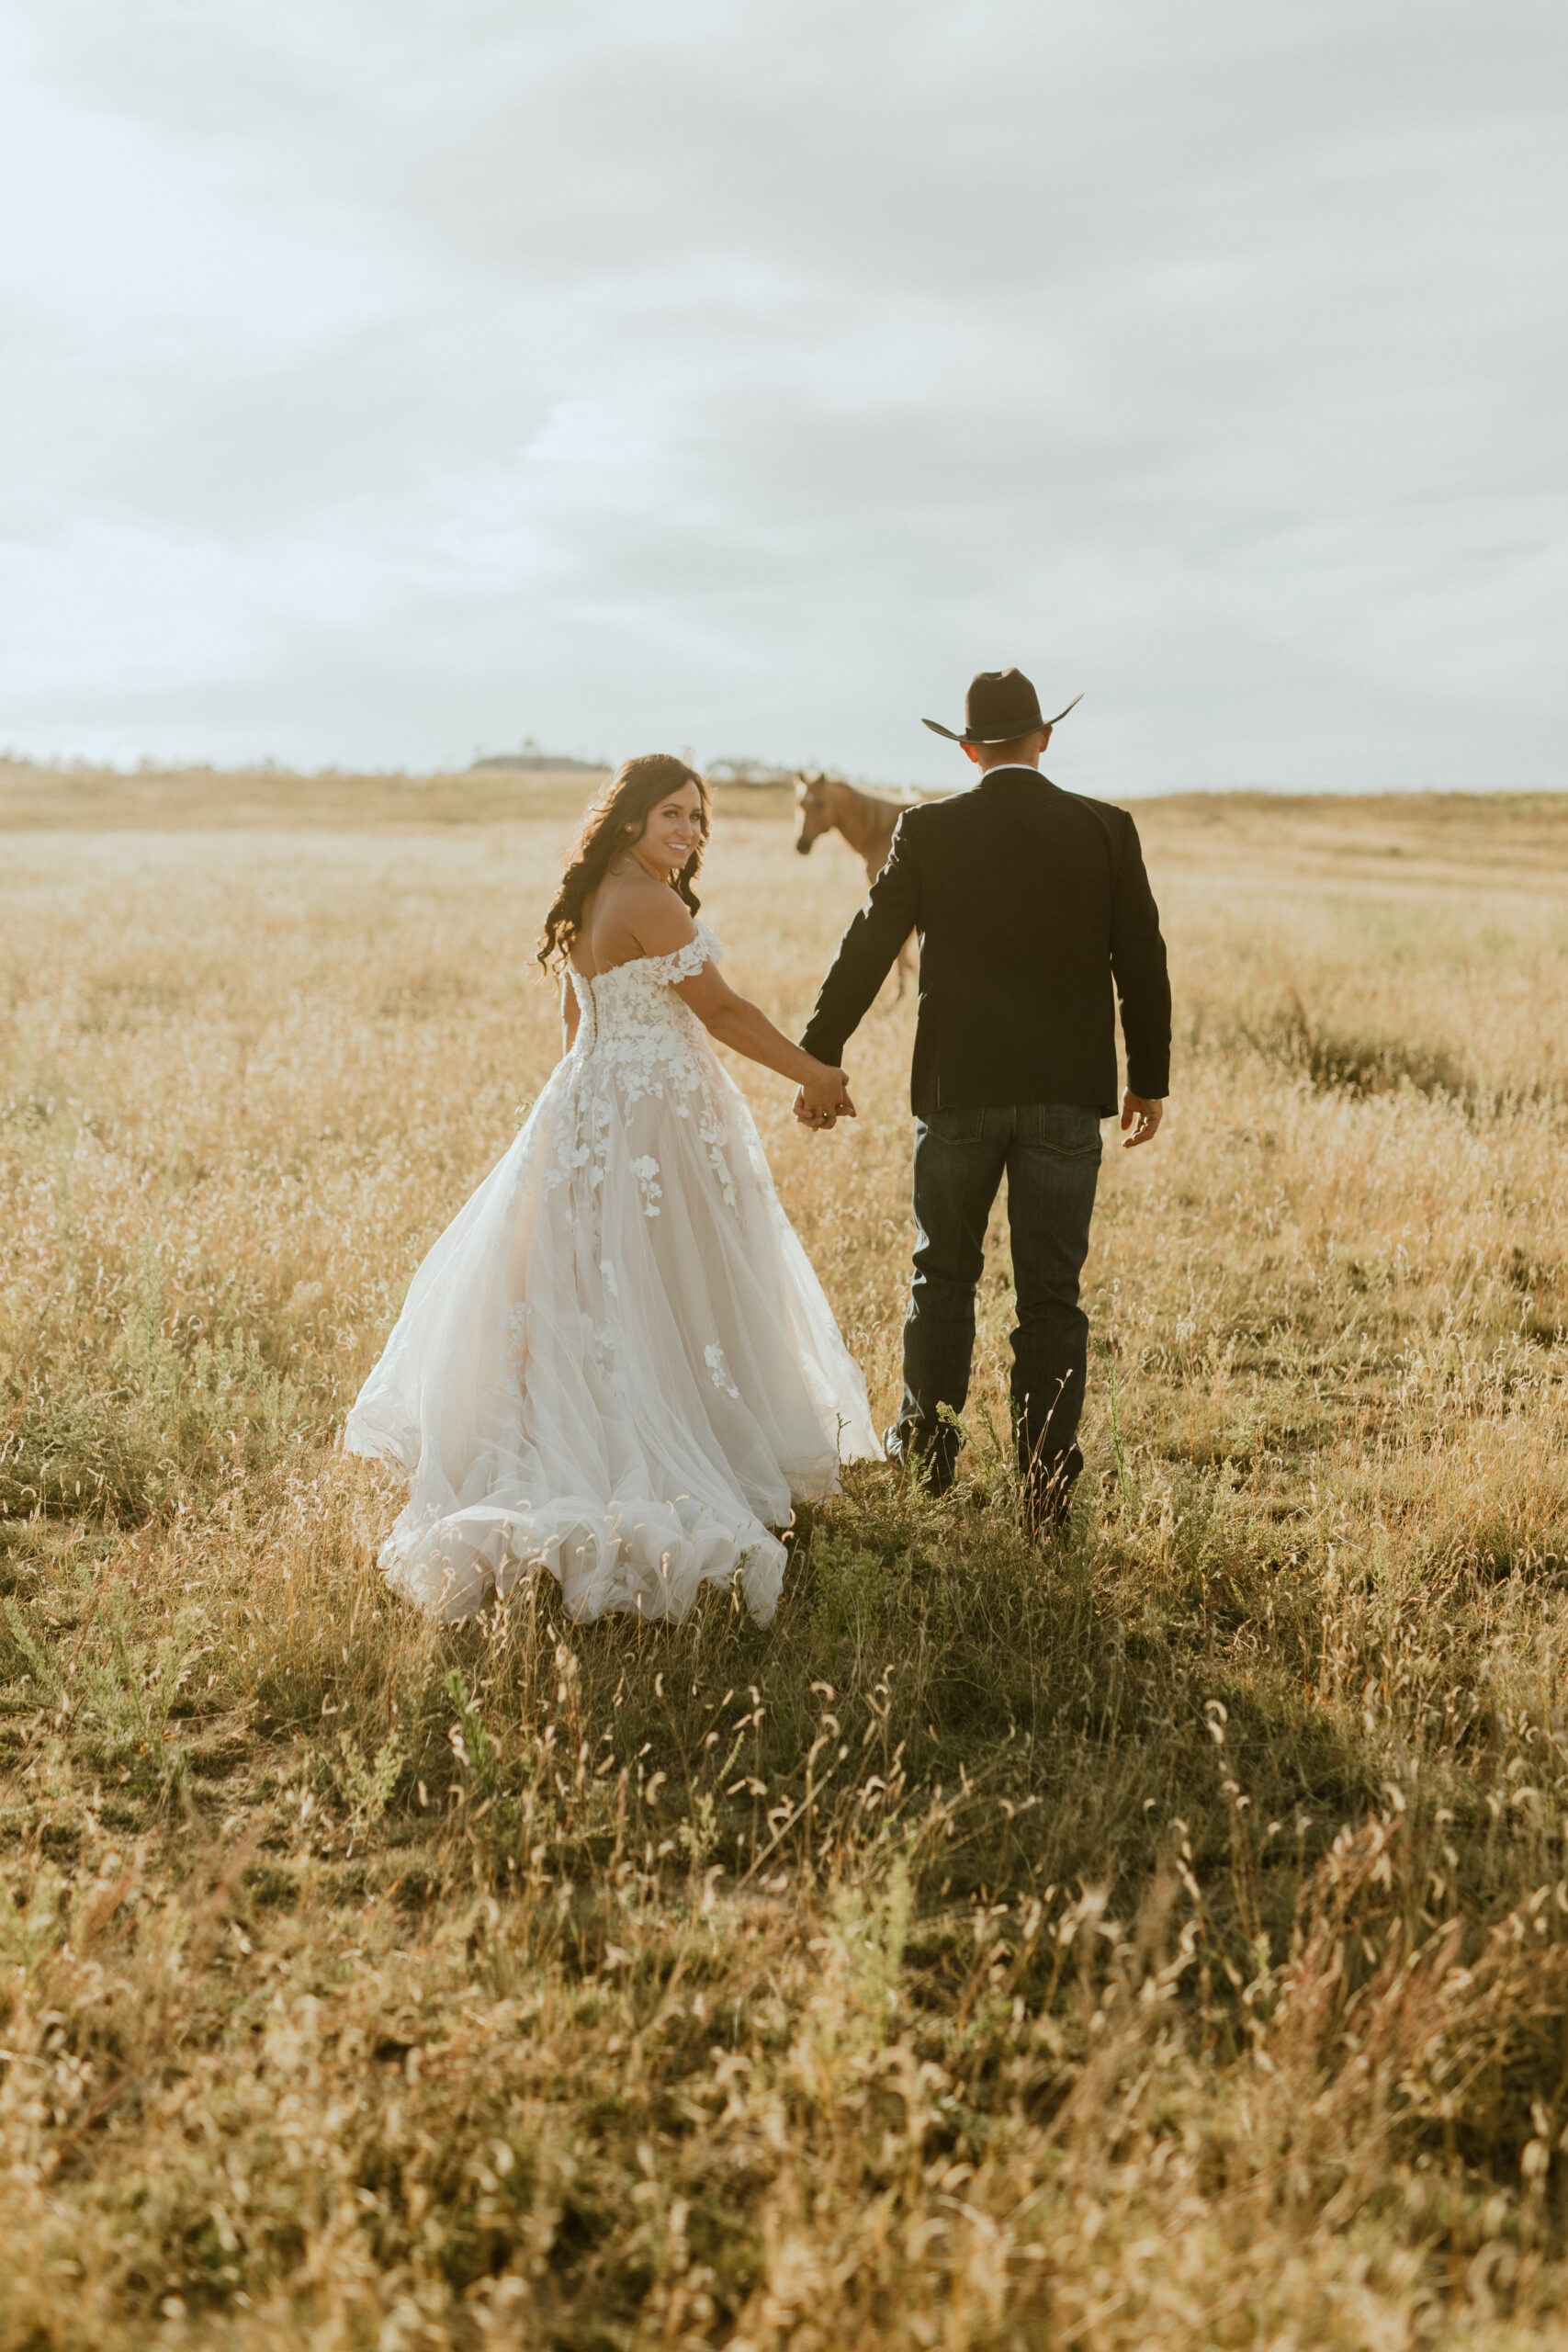 bride and groom wedding photo in midwest field with horse in distance at the golden hour